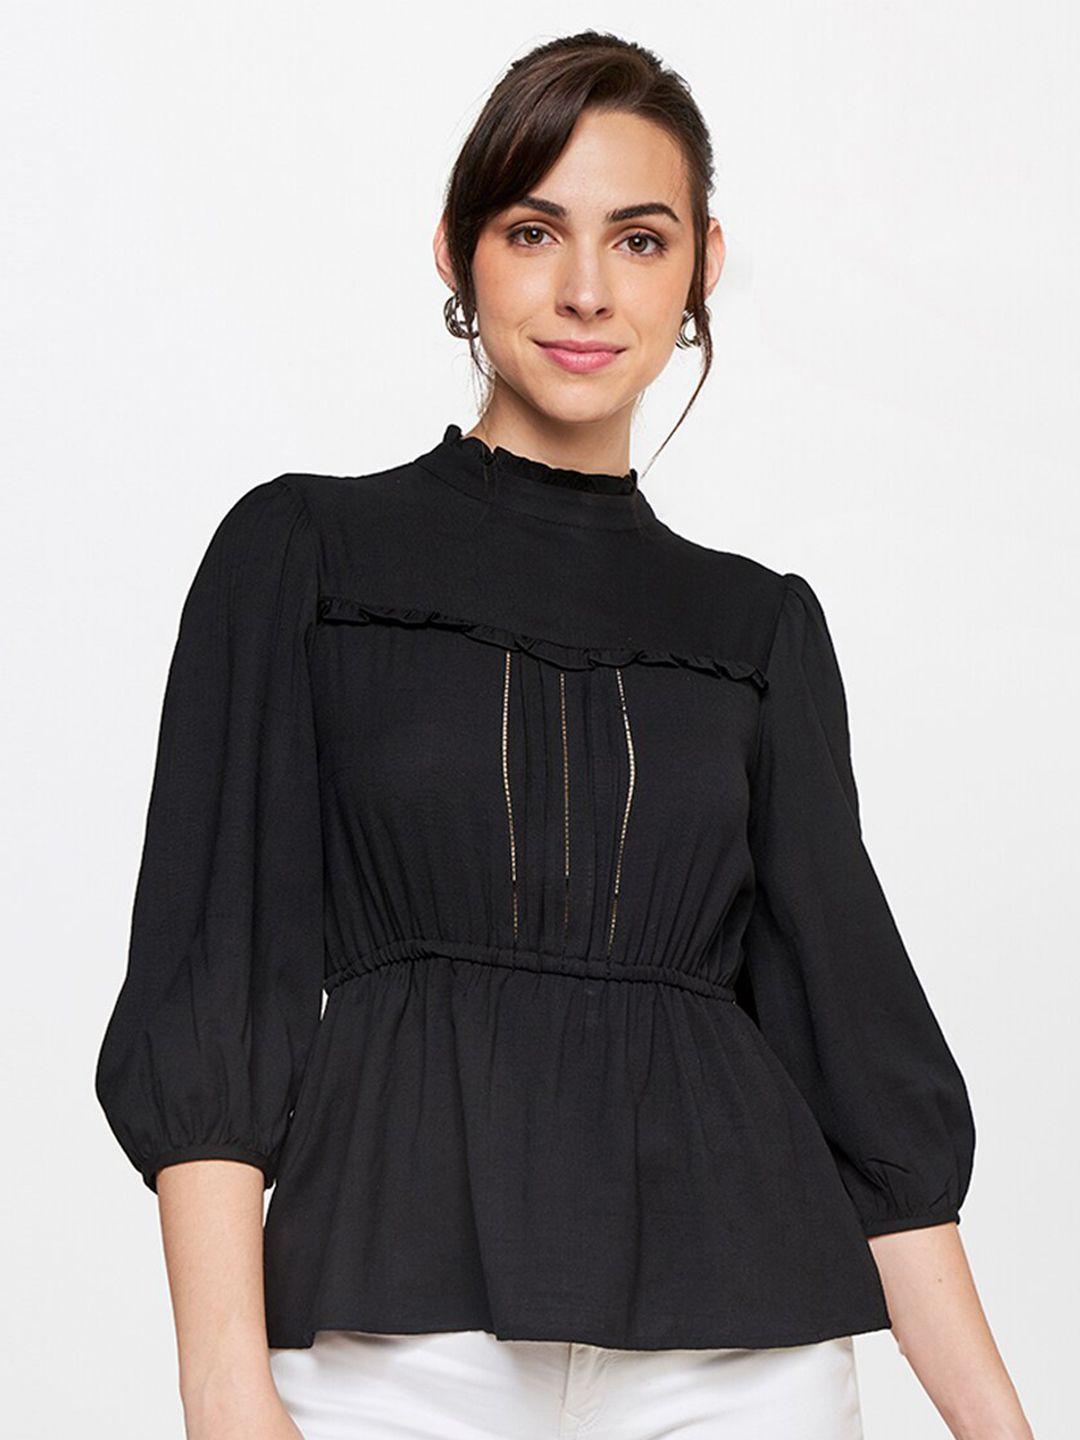 and black cinched waist top